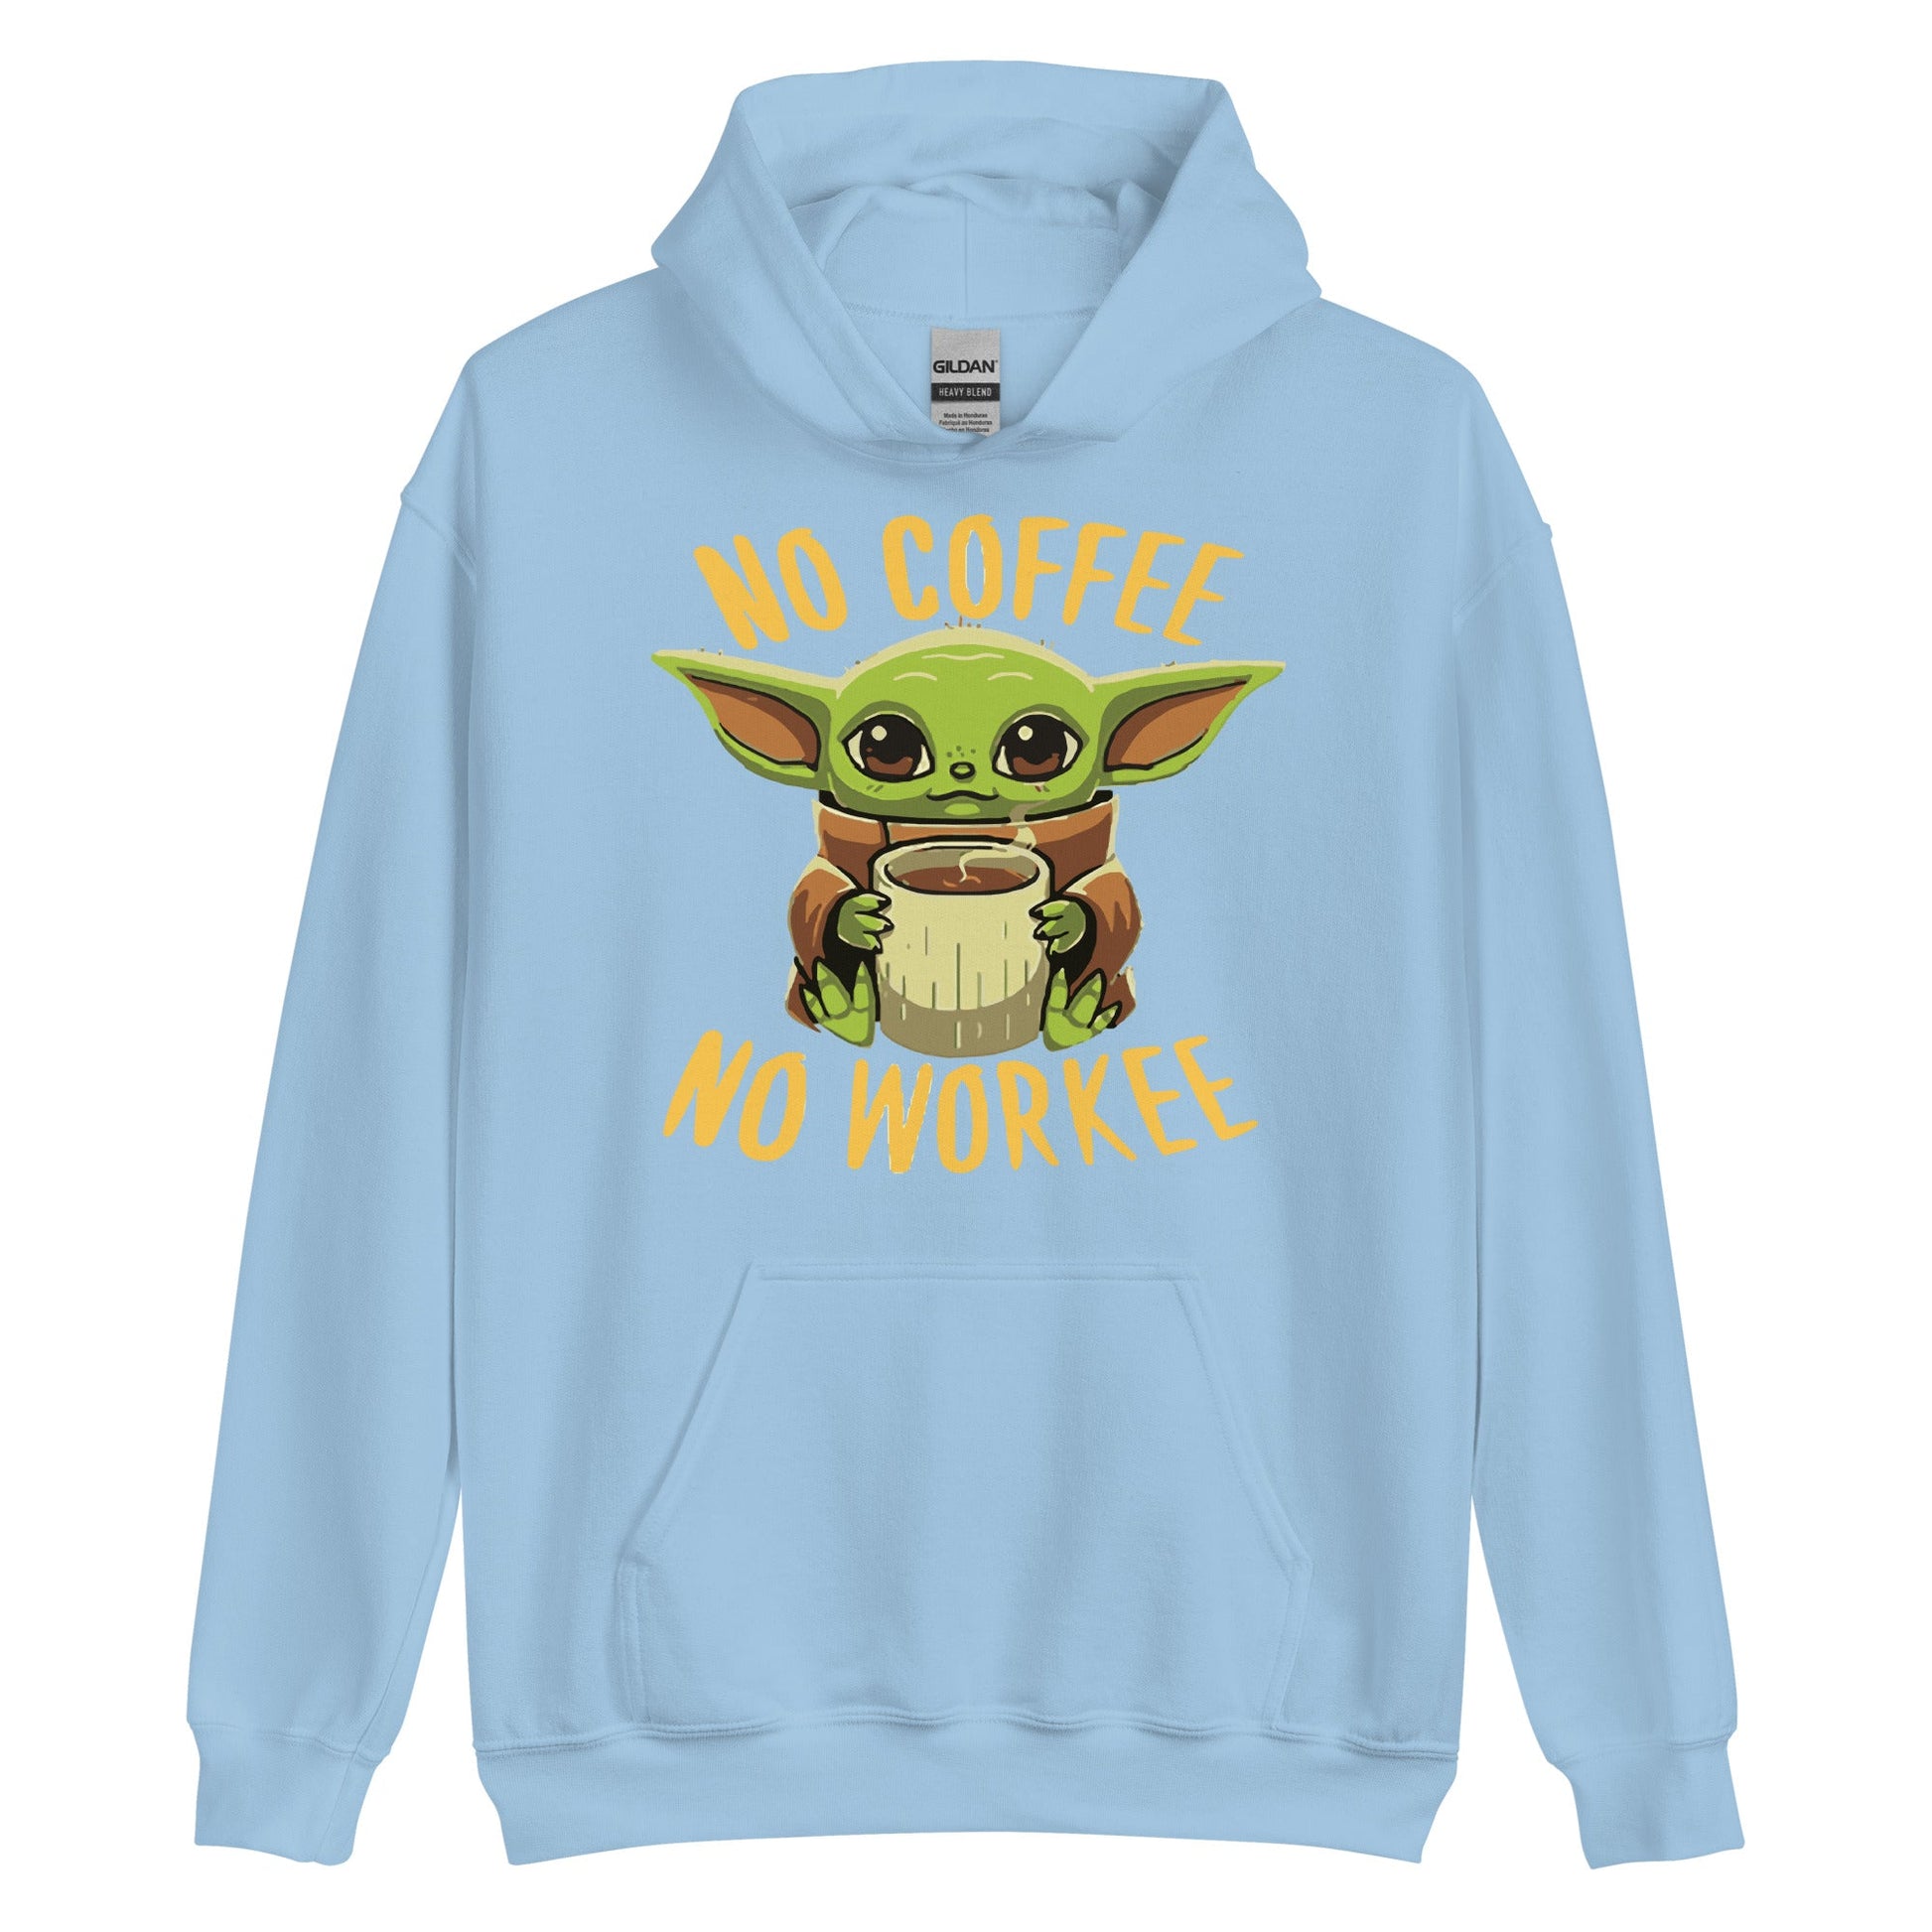 baby yoda hoodie - no coffe no workee - The Truth Graphics